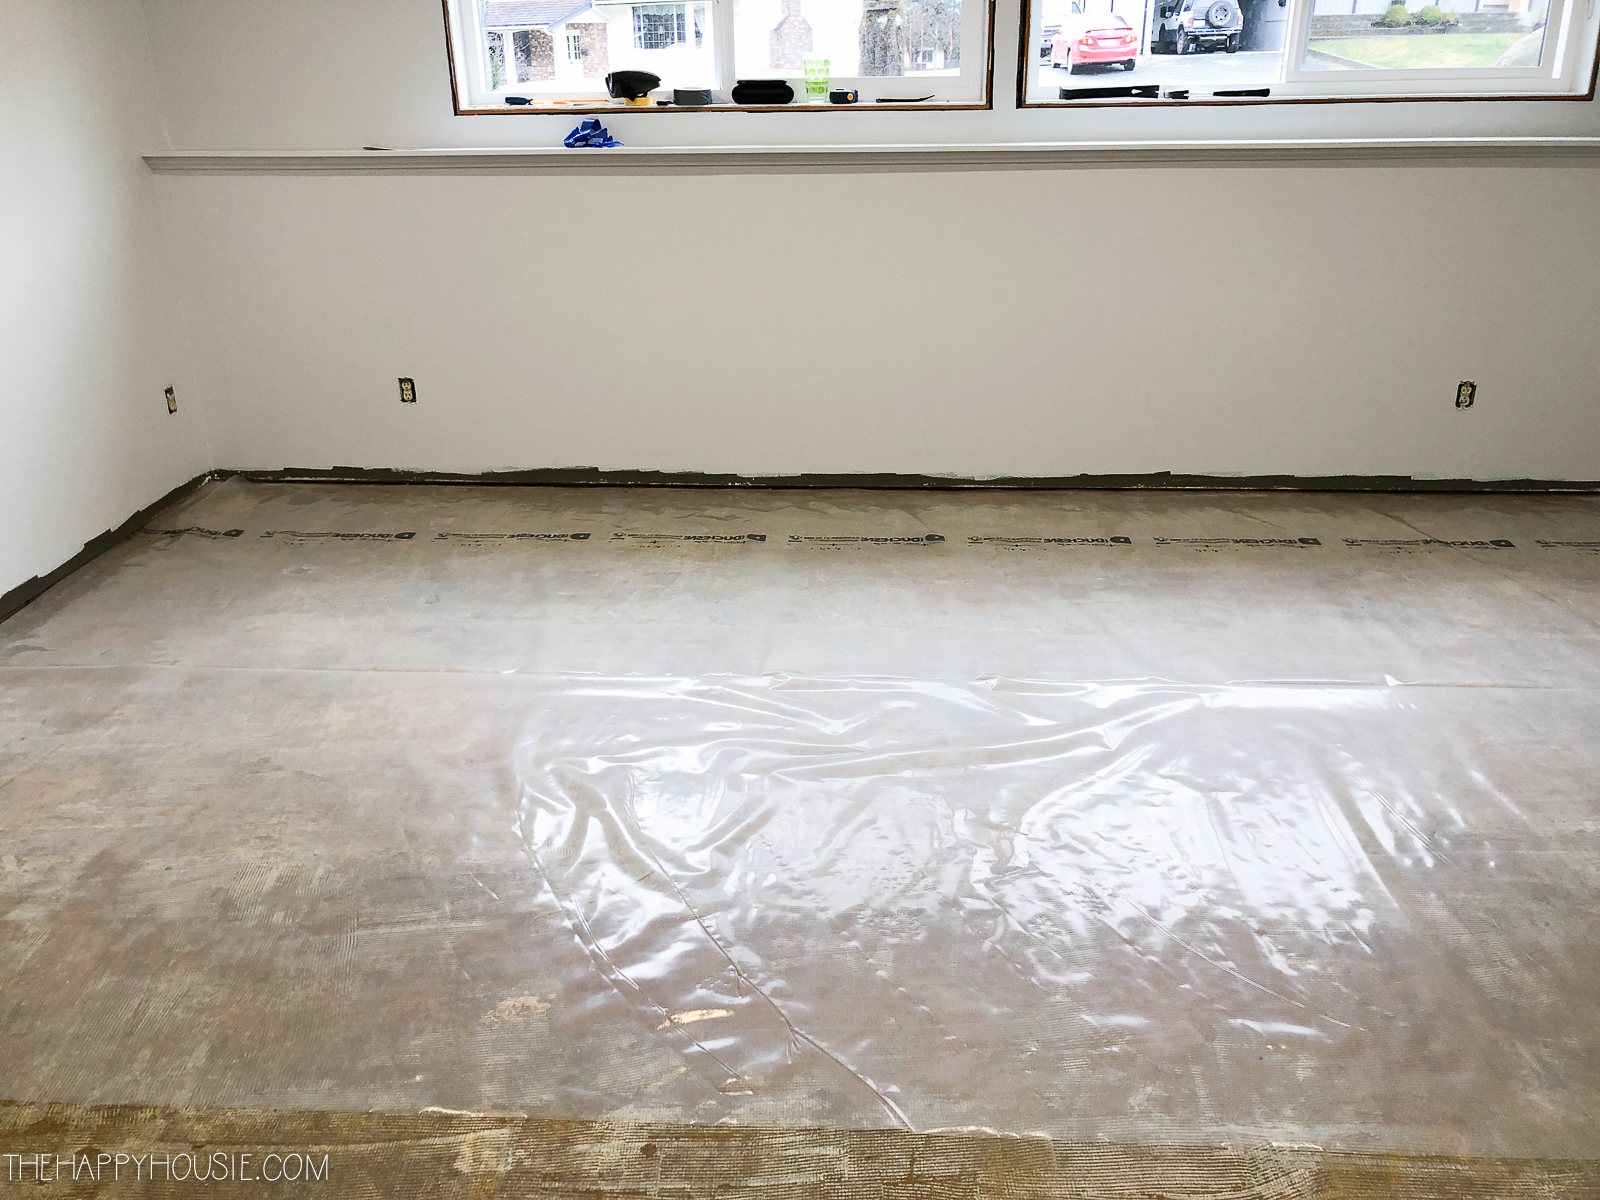 Install Vinyl Plank Over Concrete, Can You Lay Vinyl Plank Flooring Directly On Concrete